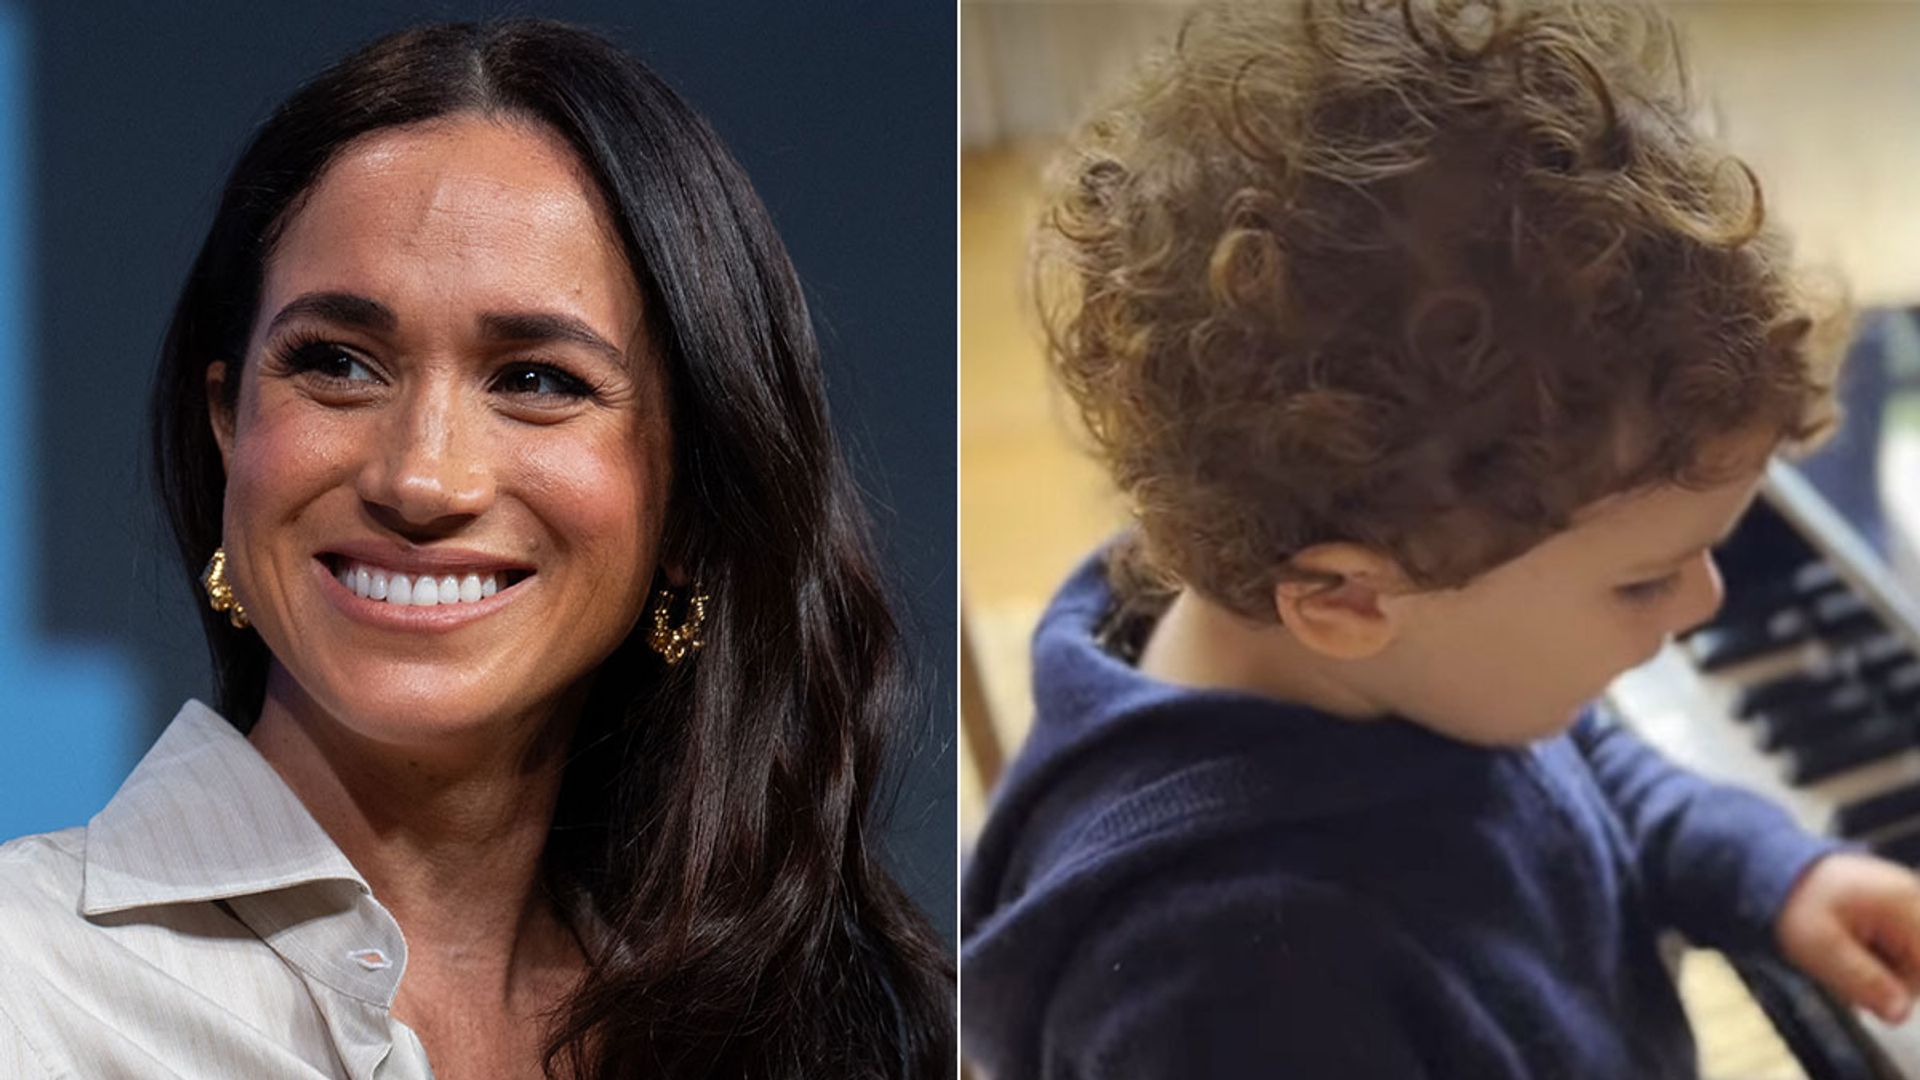 Meghan Markle throws Prince Archie up in the air in sweet home video